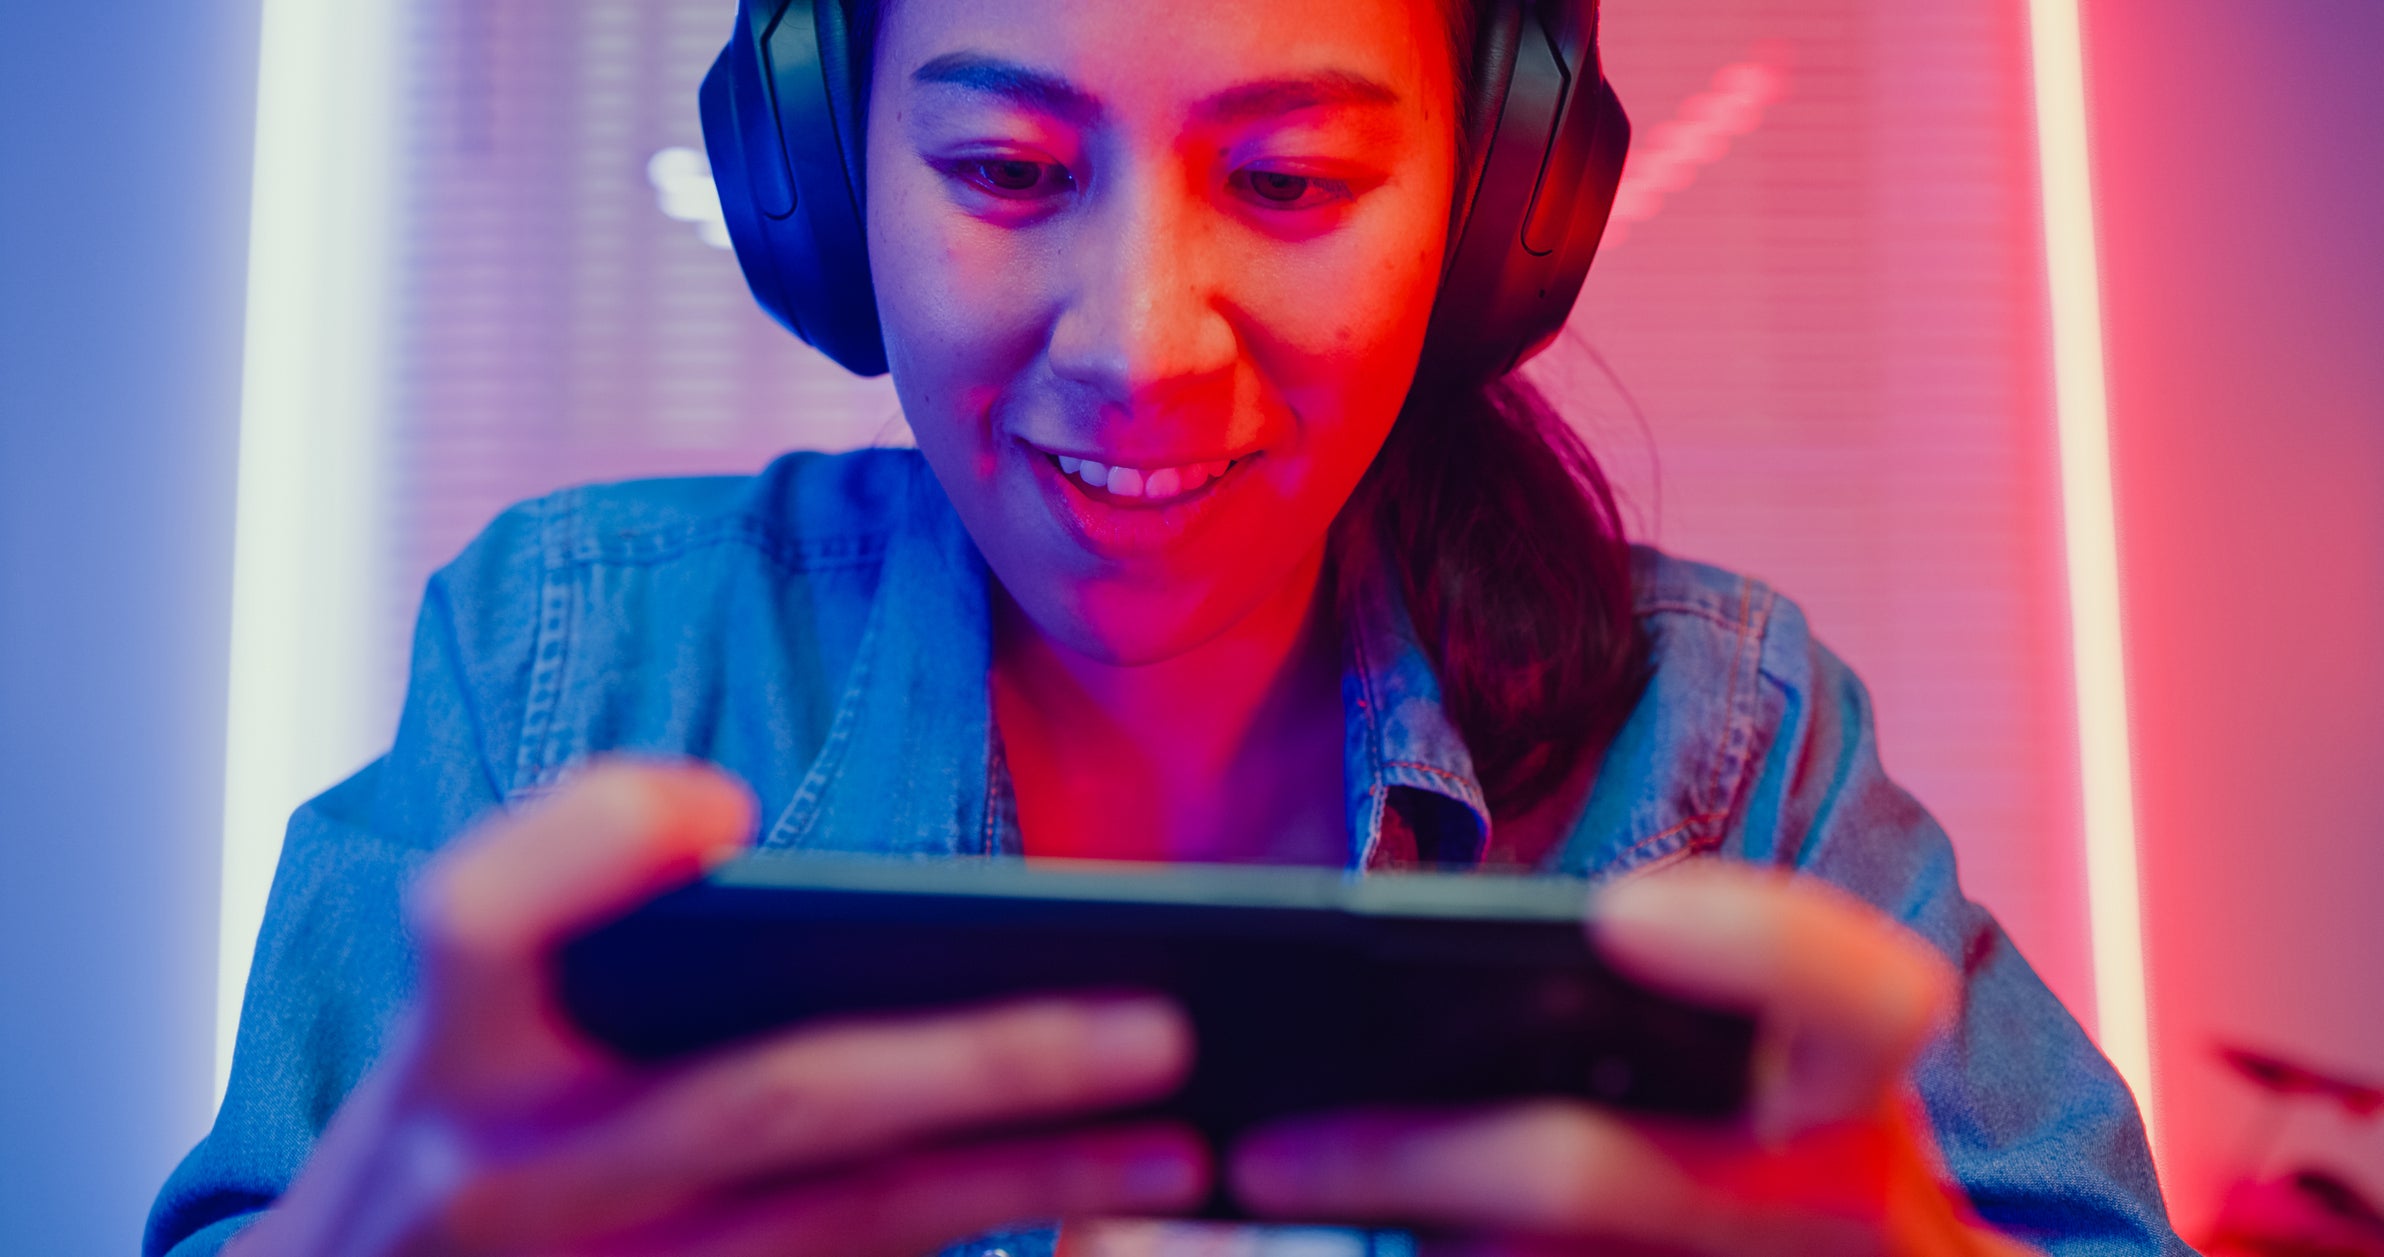 Games for good: As they help everything from ADHD to fitness, the role of video games is changing